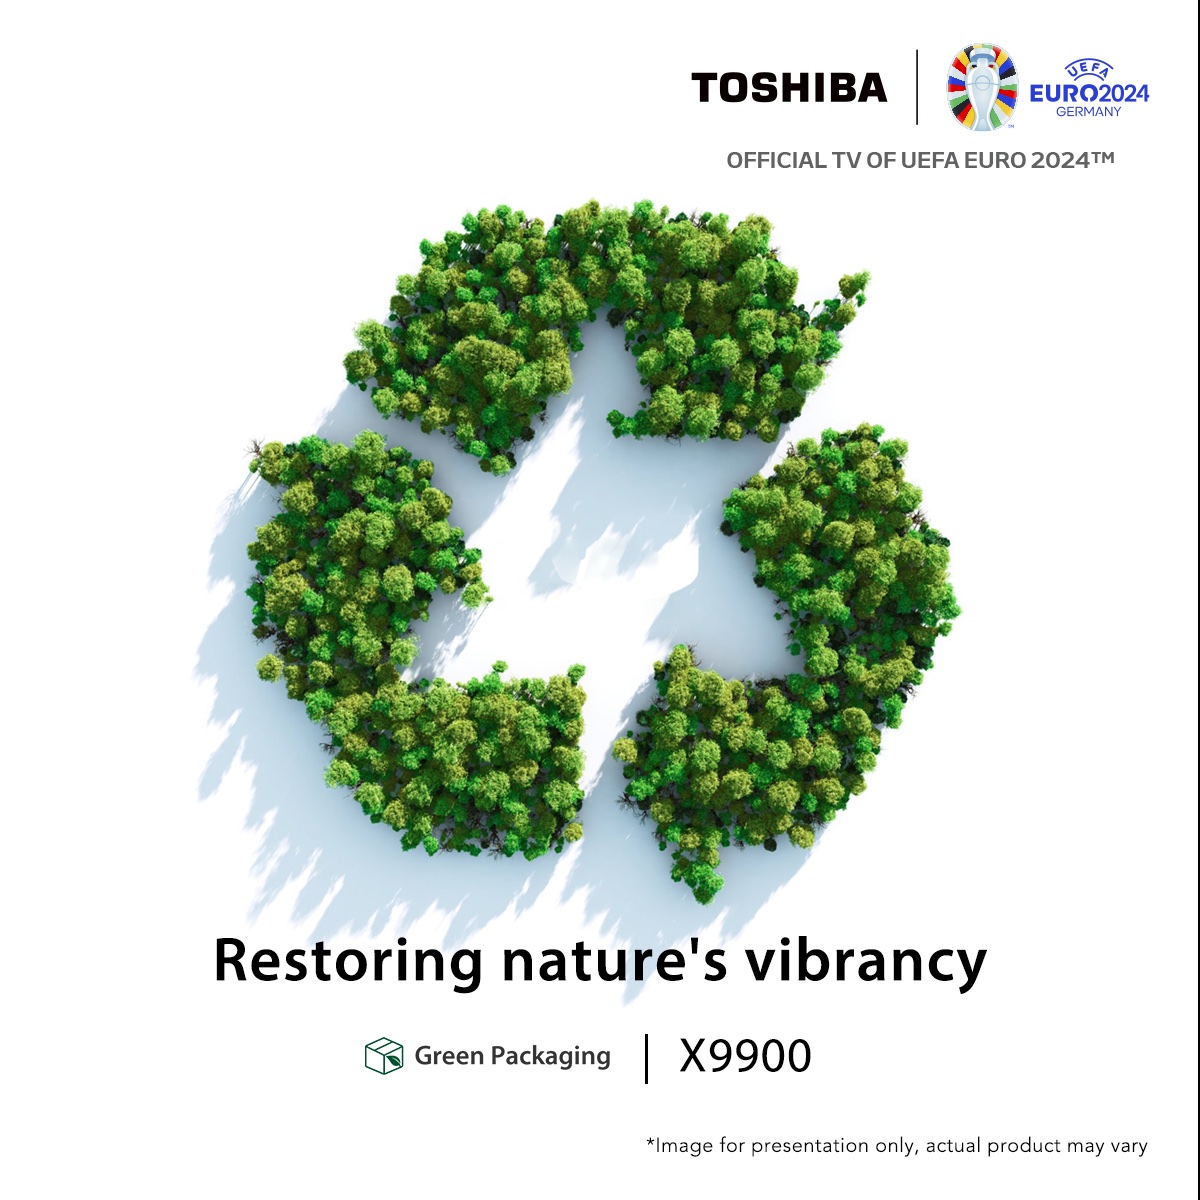 Happy Earth Day from #ToshibaTV! Our TVs come in environmentally friendly brown carton boxes, promoting easy recycling and reducing pollution. After all, less color in packaging means more green for the planet.